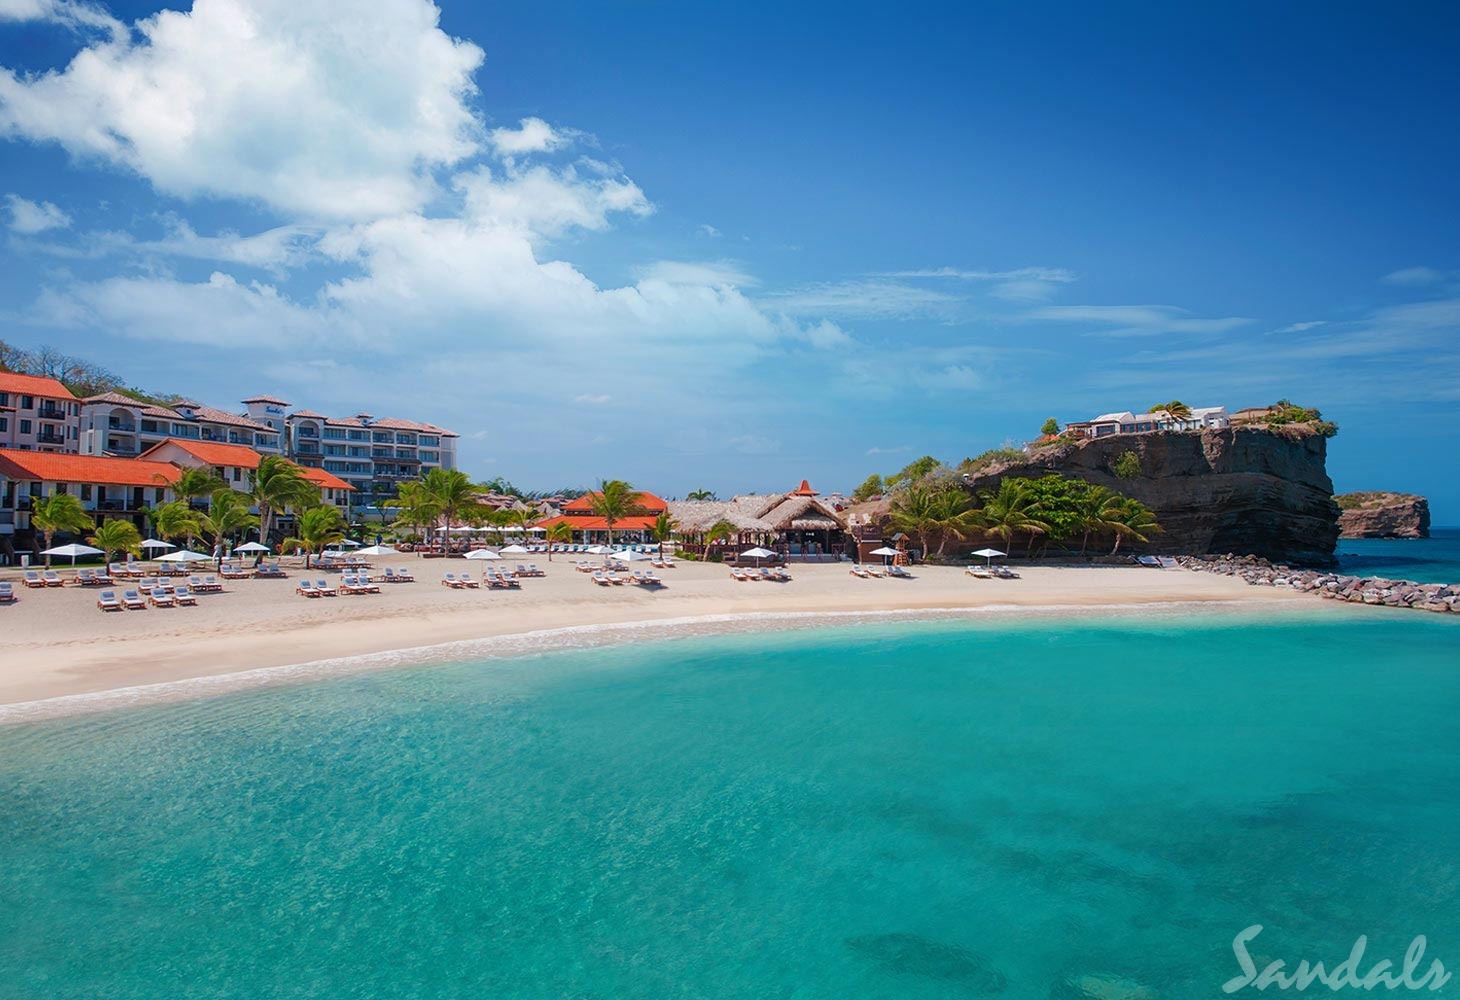 Top Travel Tips for Sandals Grenada: A Sandals Staff Review